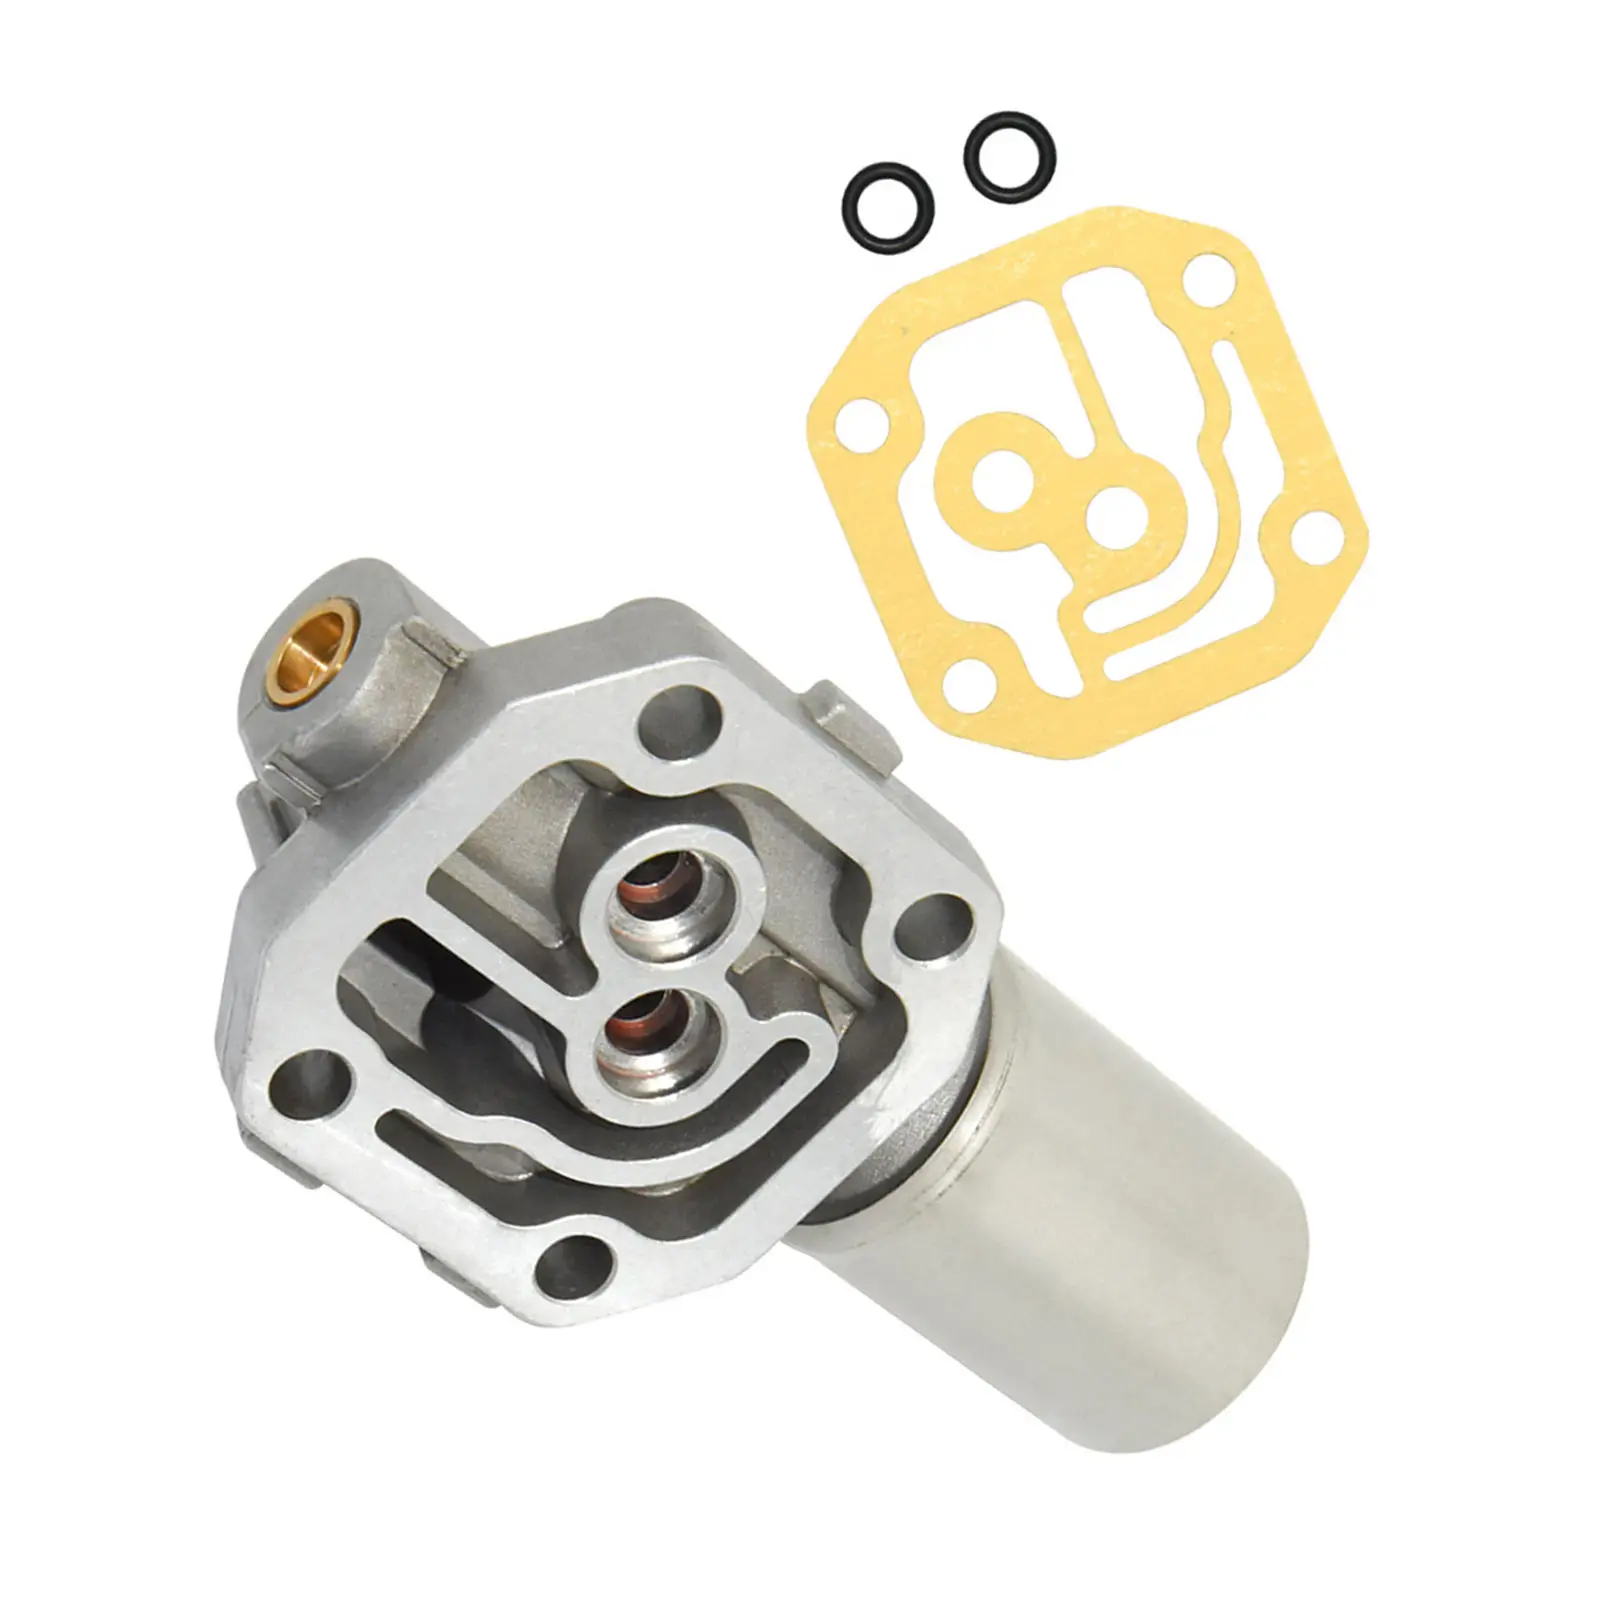 Auto Transmission Solenoid with Gasket O-Rings Linear Control Solenoid for Honda 08-15 28250-R90-003 Clutch Pressure Control